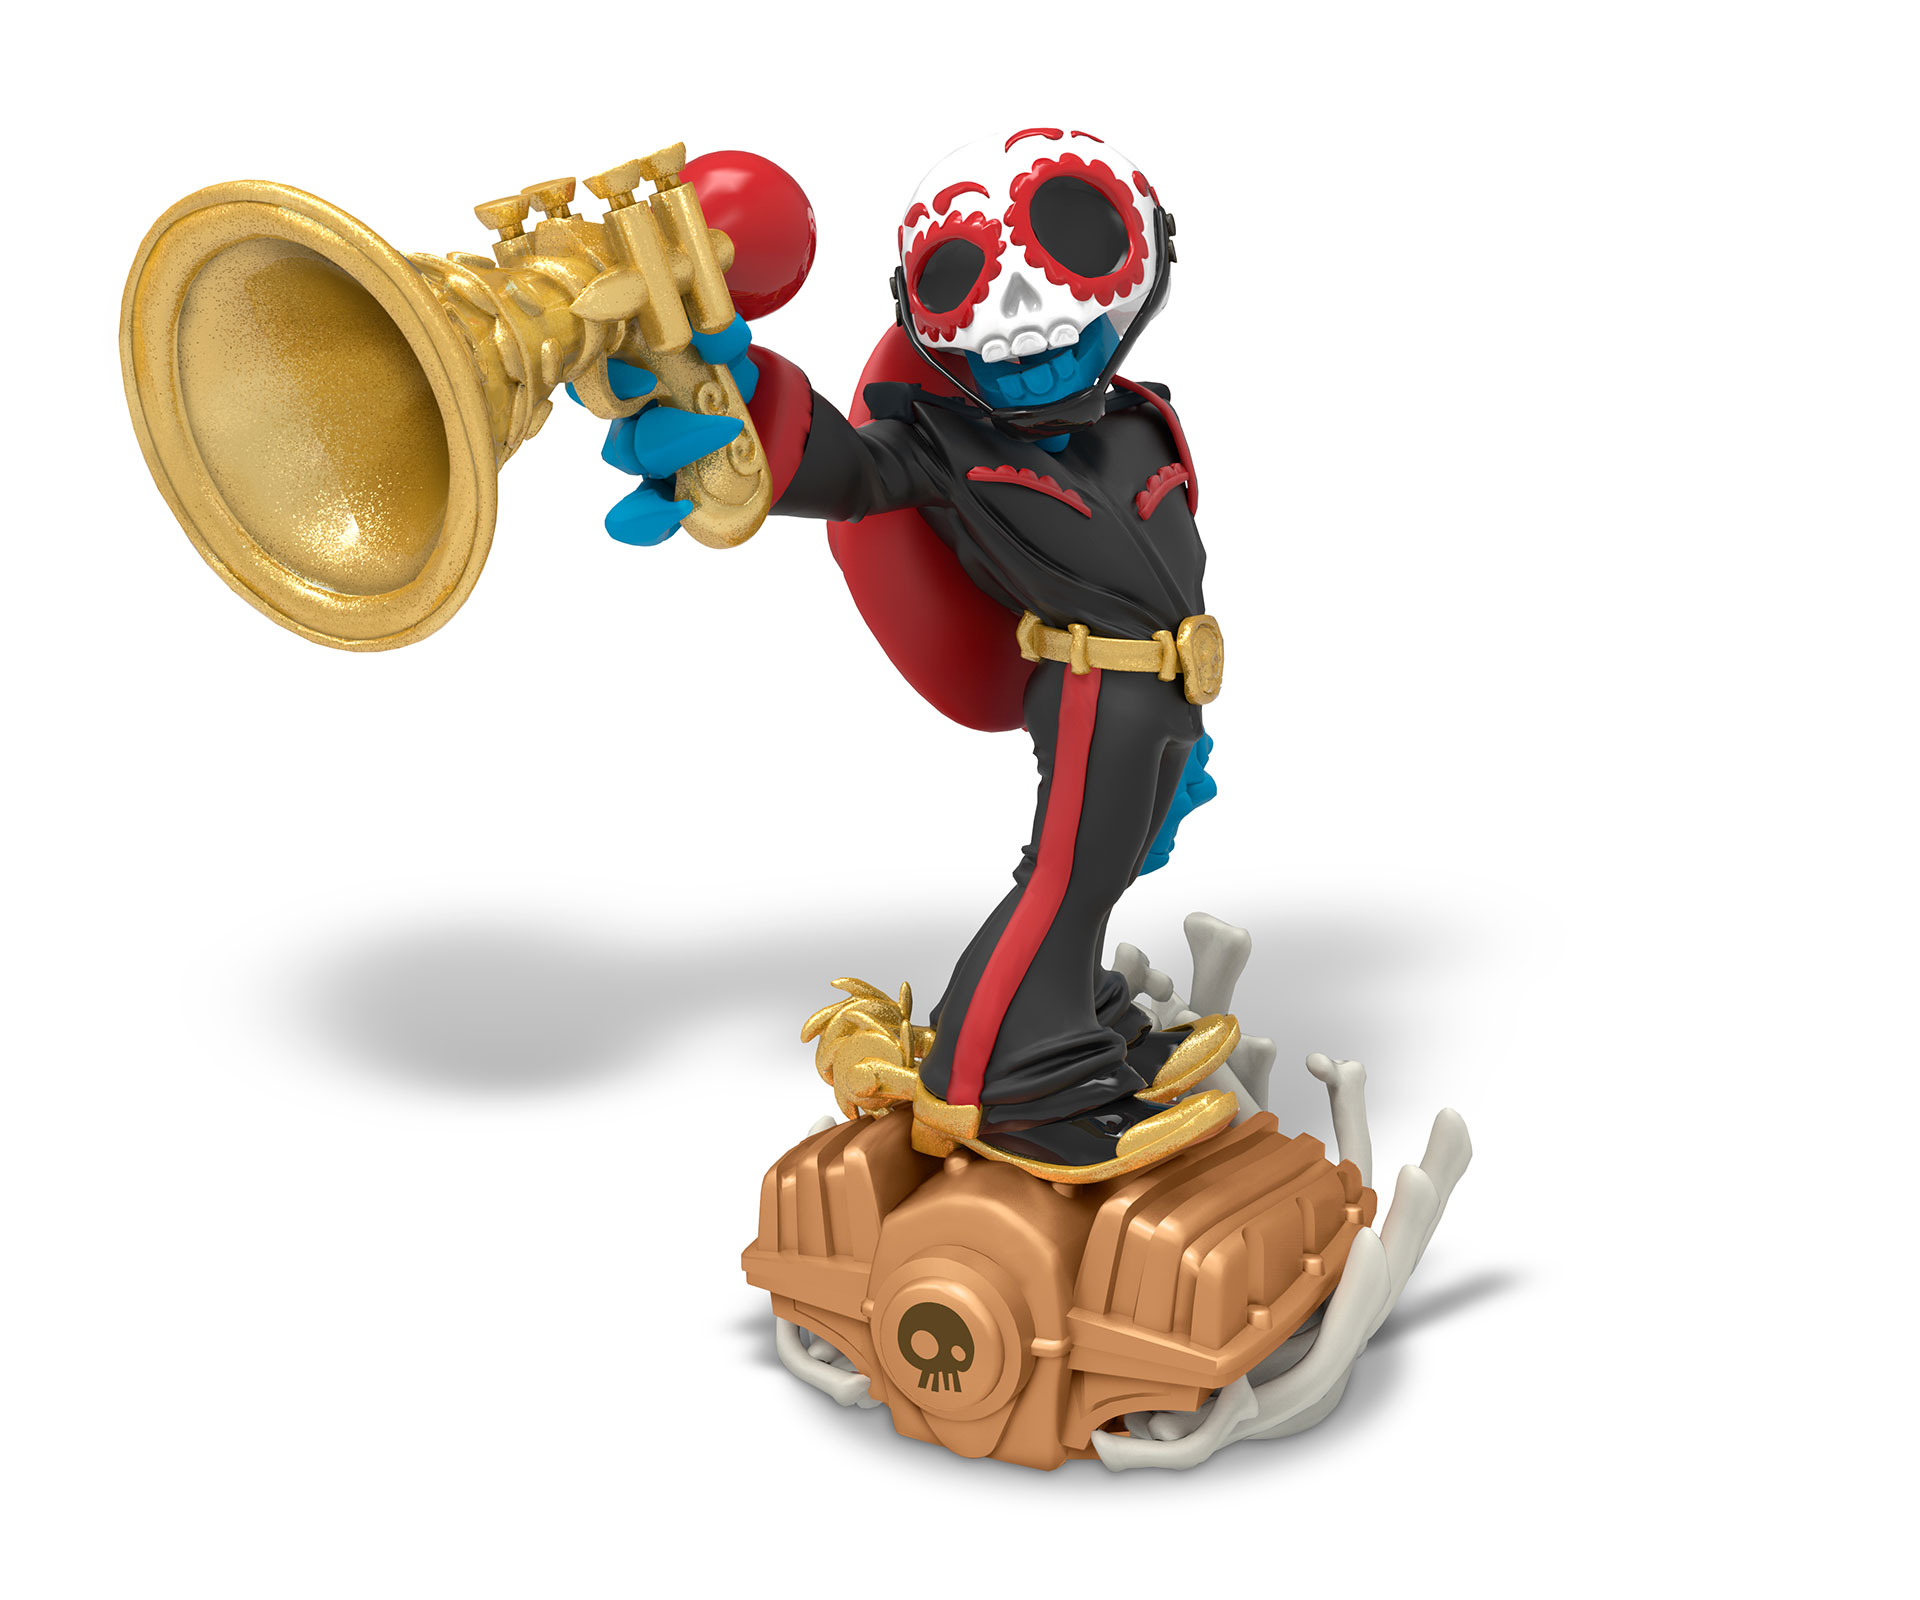 Meet Fiesta, The Undead Skylander With His Own Mariachi Band